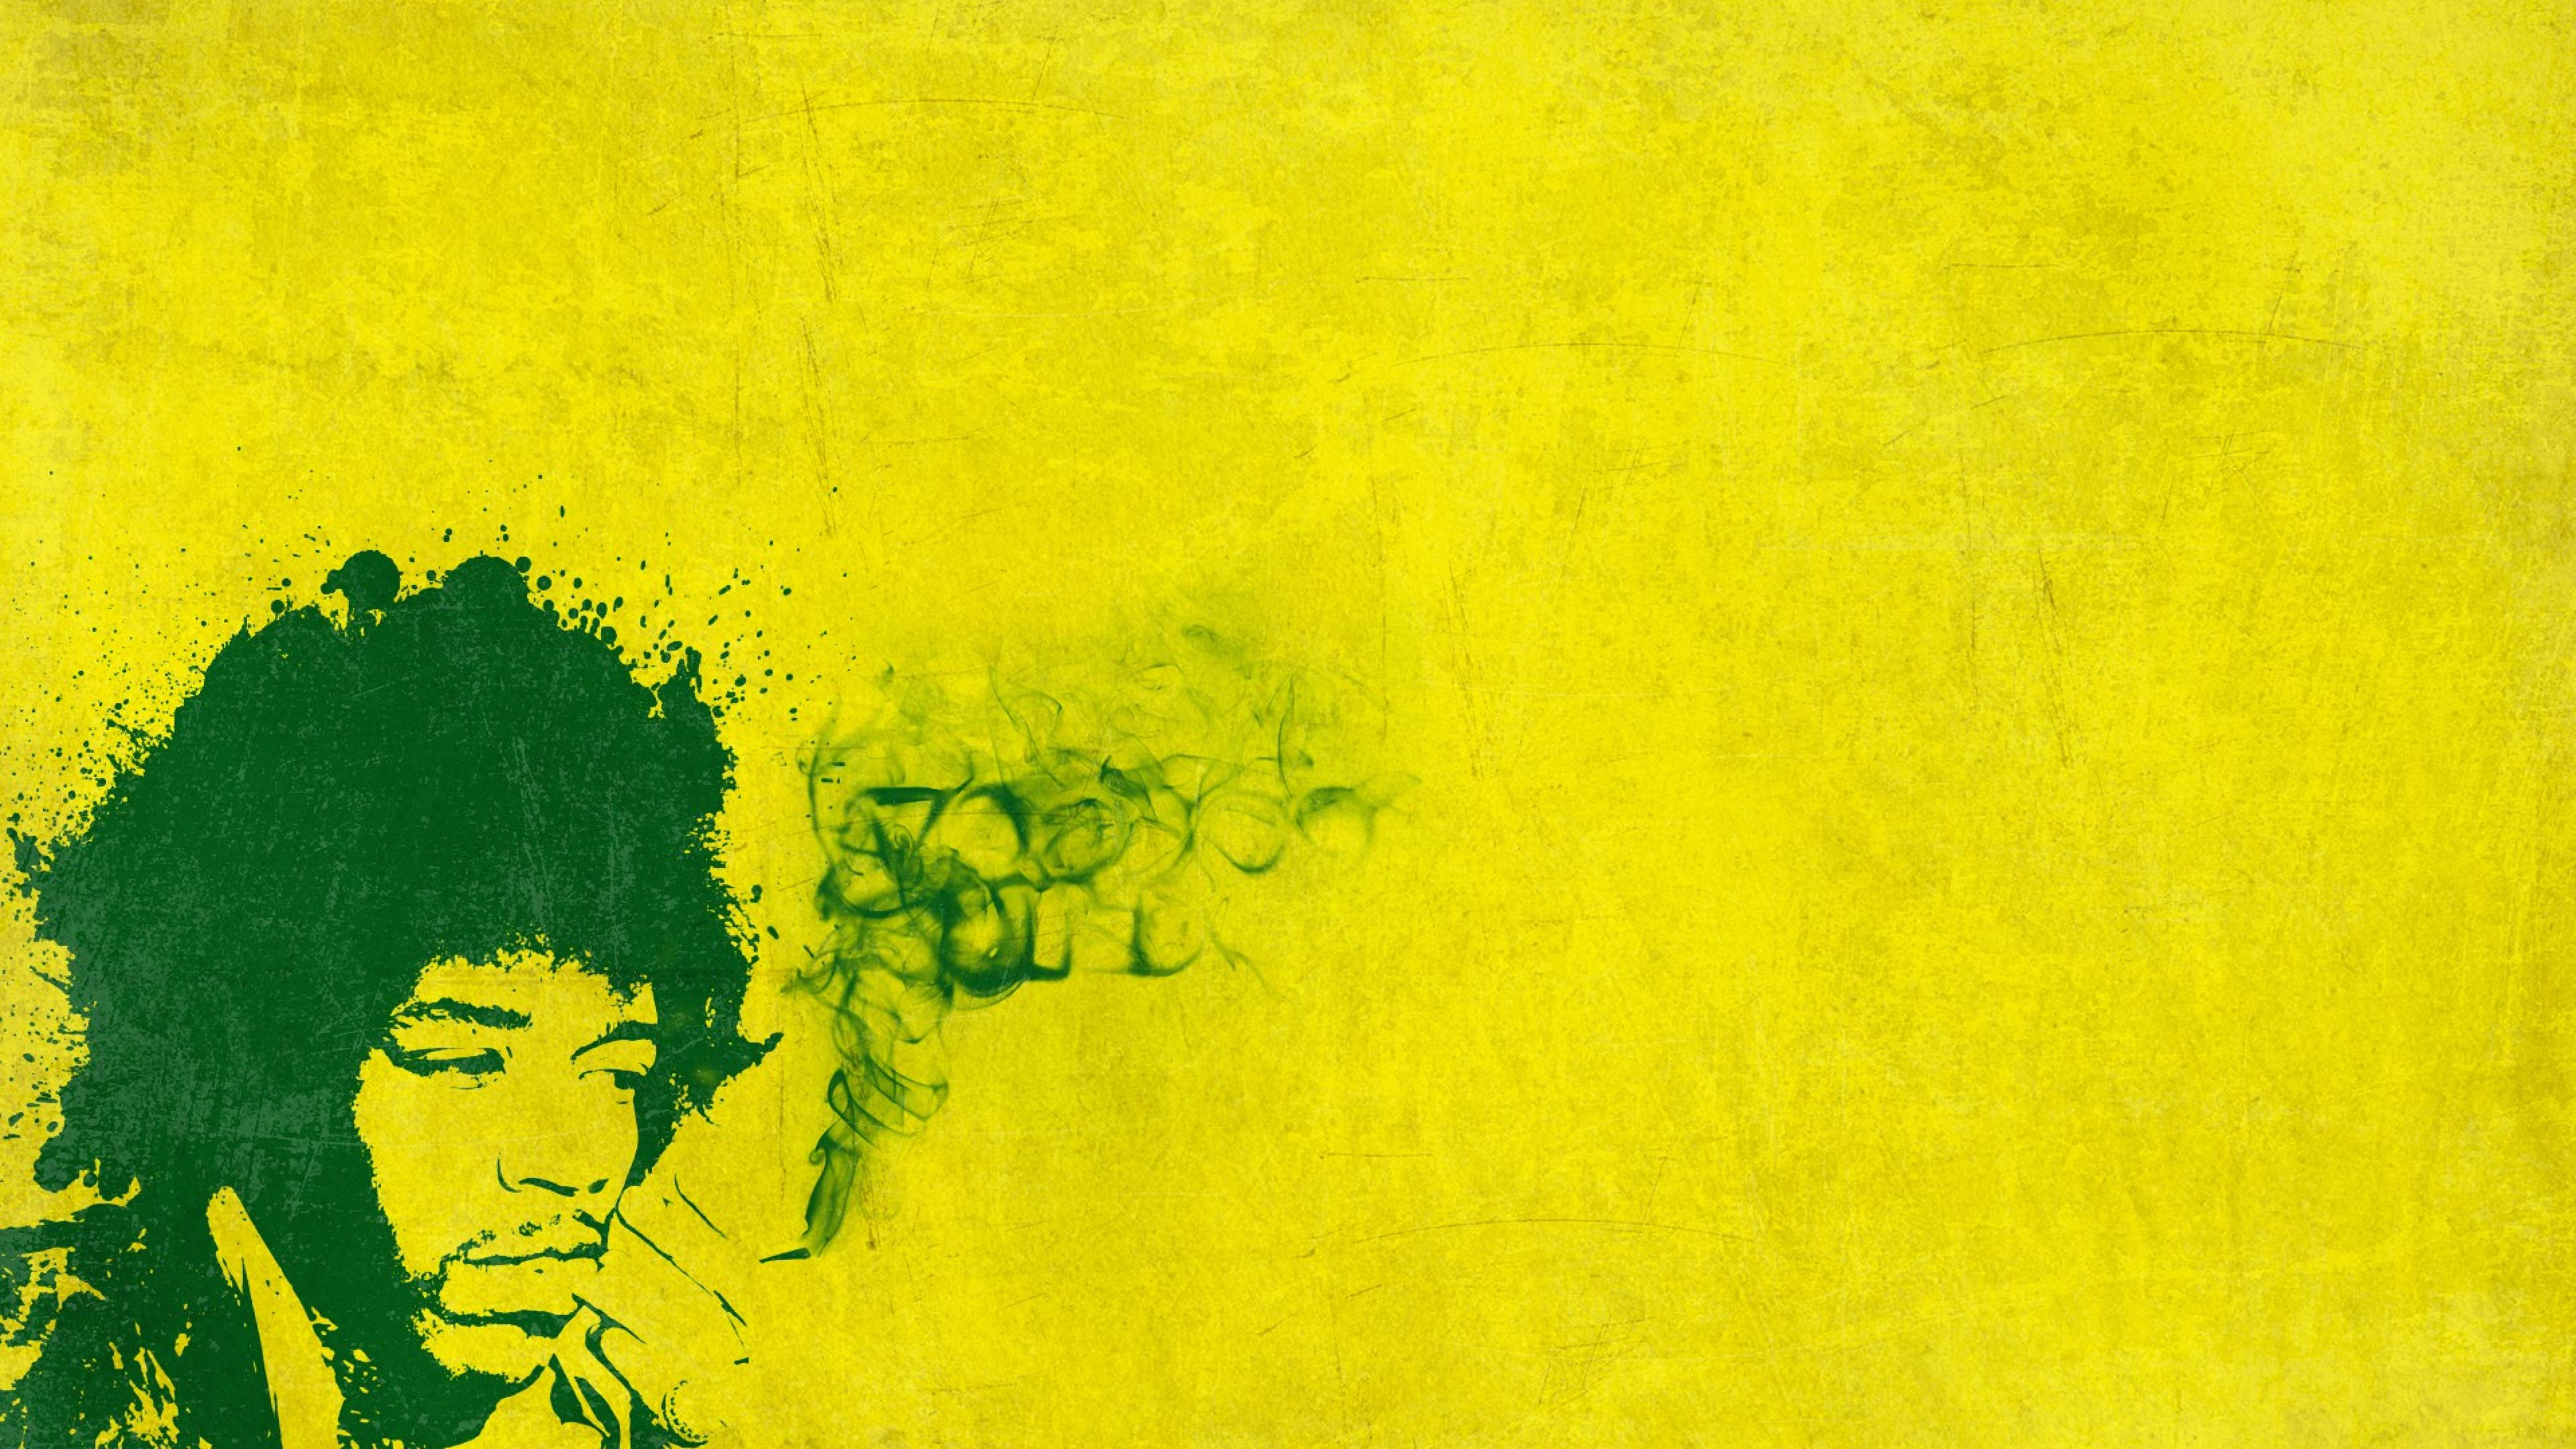 Jimi hendrix abstract artwork best widescreen background awesome #aQxG